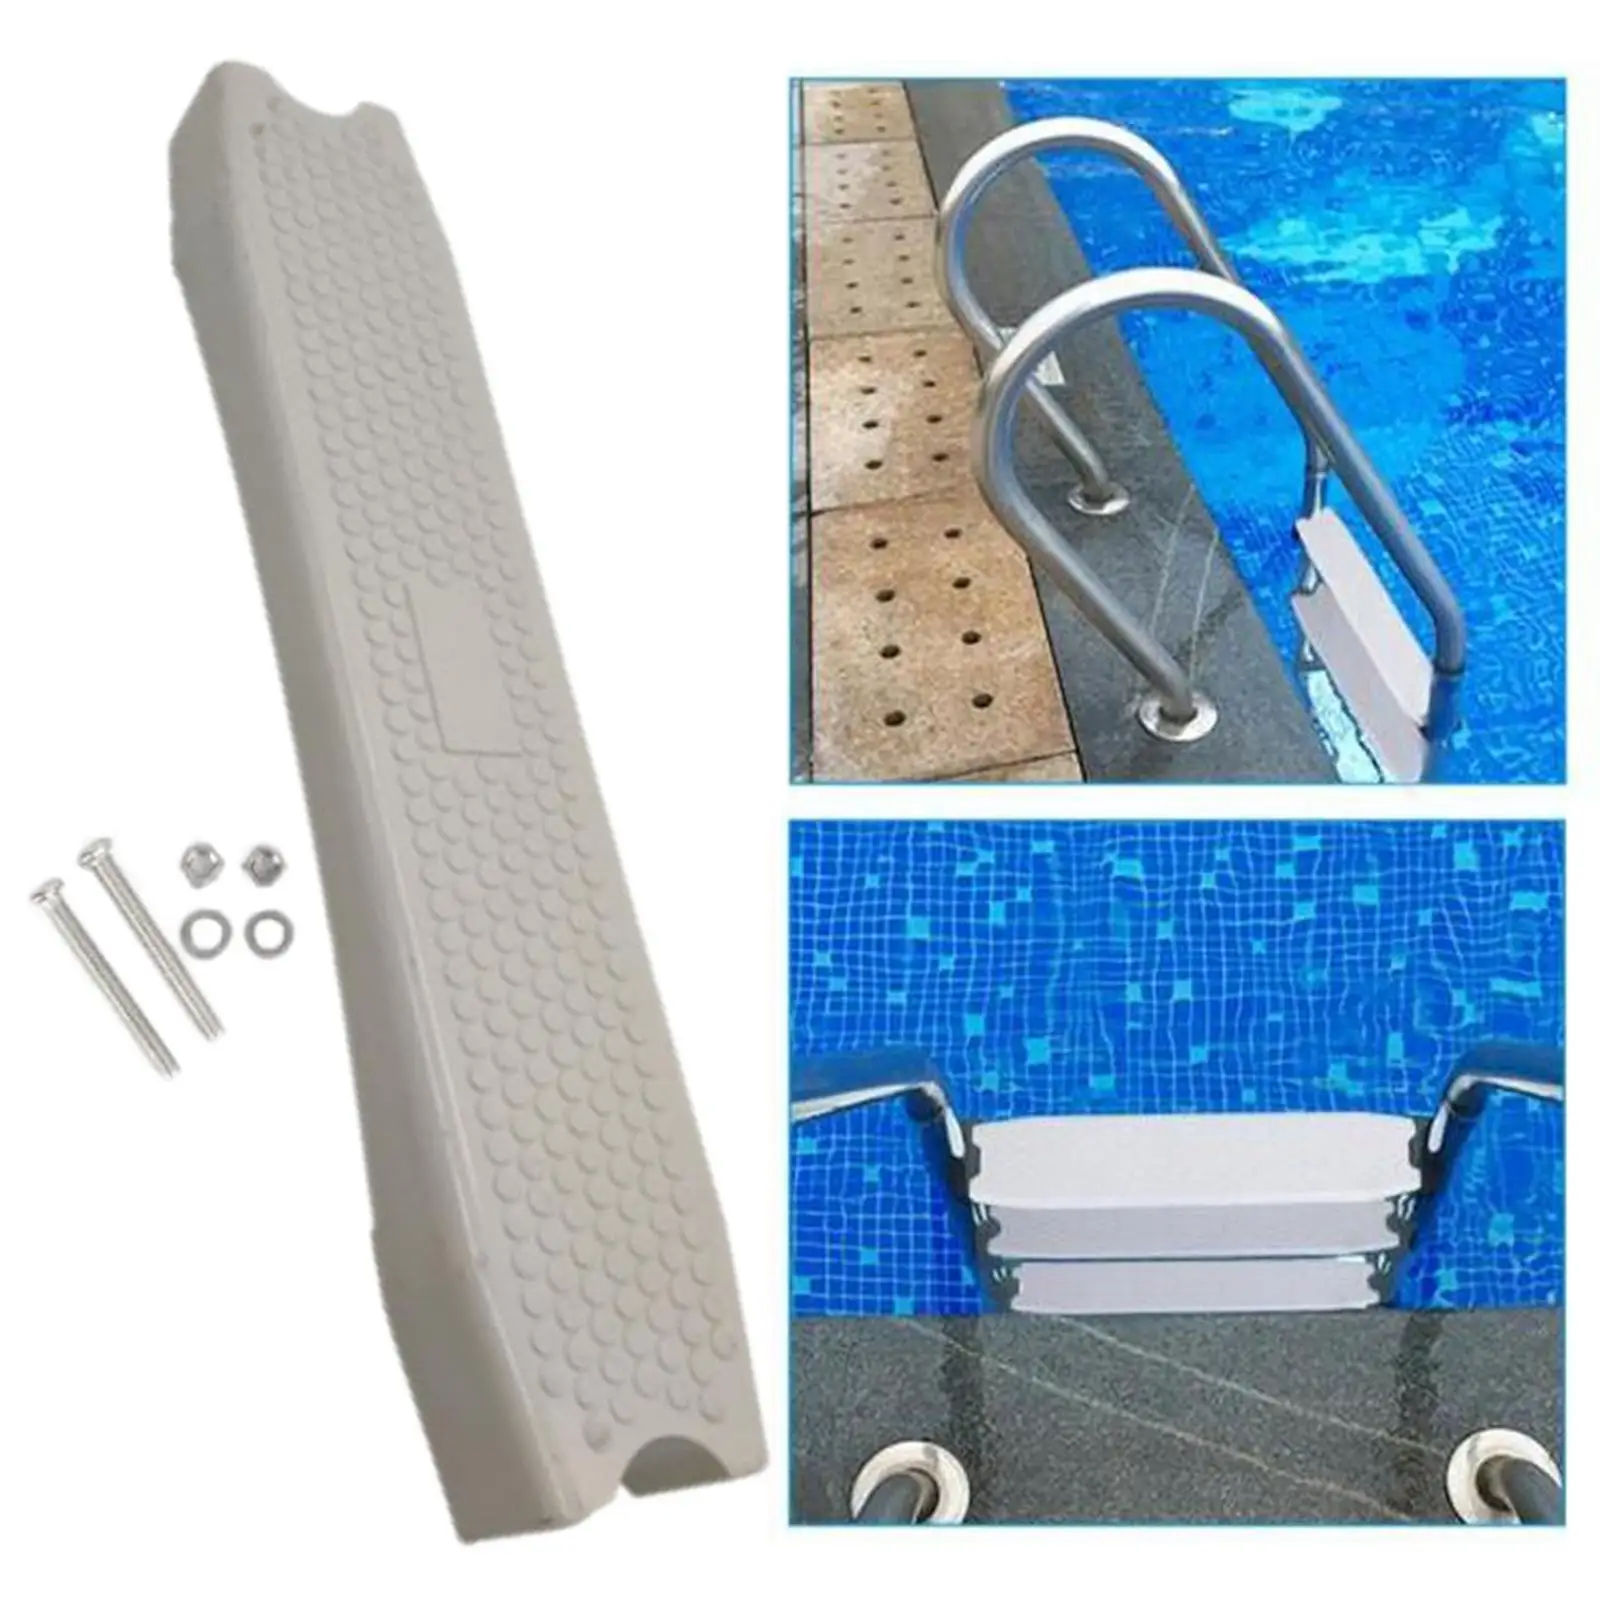 Underwater Step Ladder with Screws Swimming Pool Replacement Anti Slip in Ground Durable Escalator Pedal Ladder Rung Step